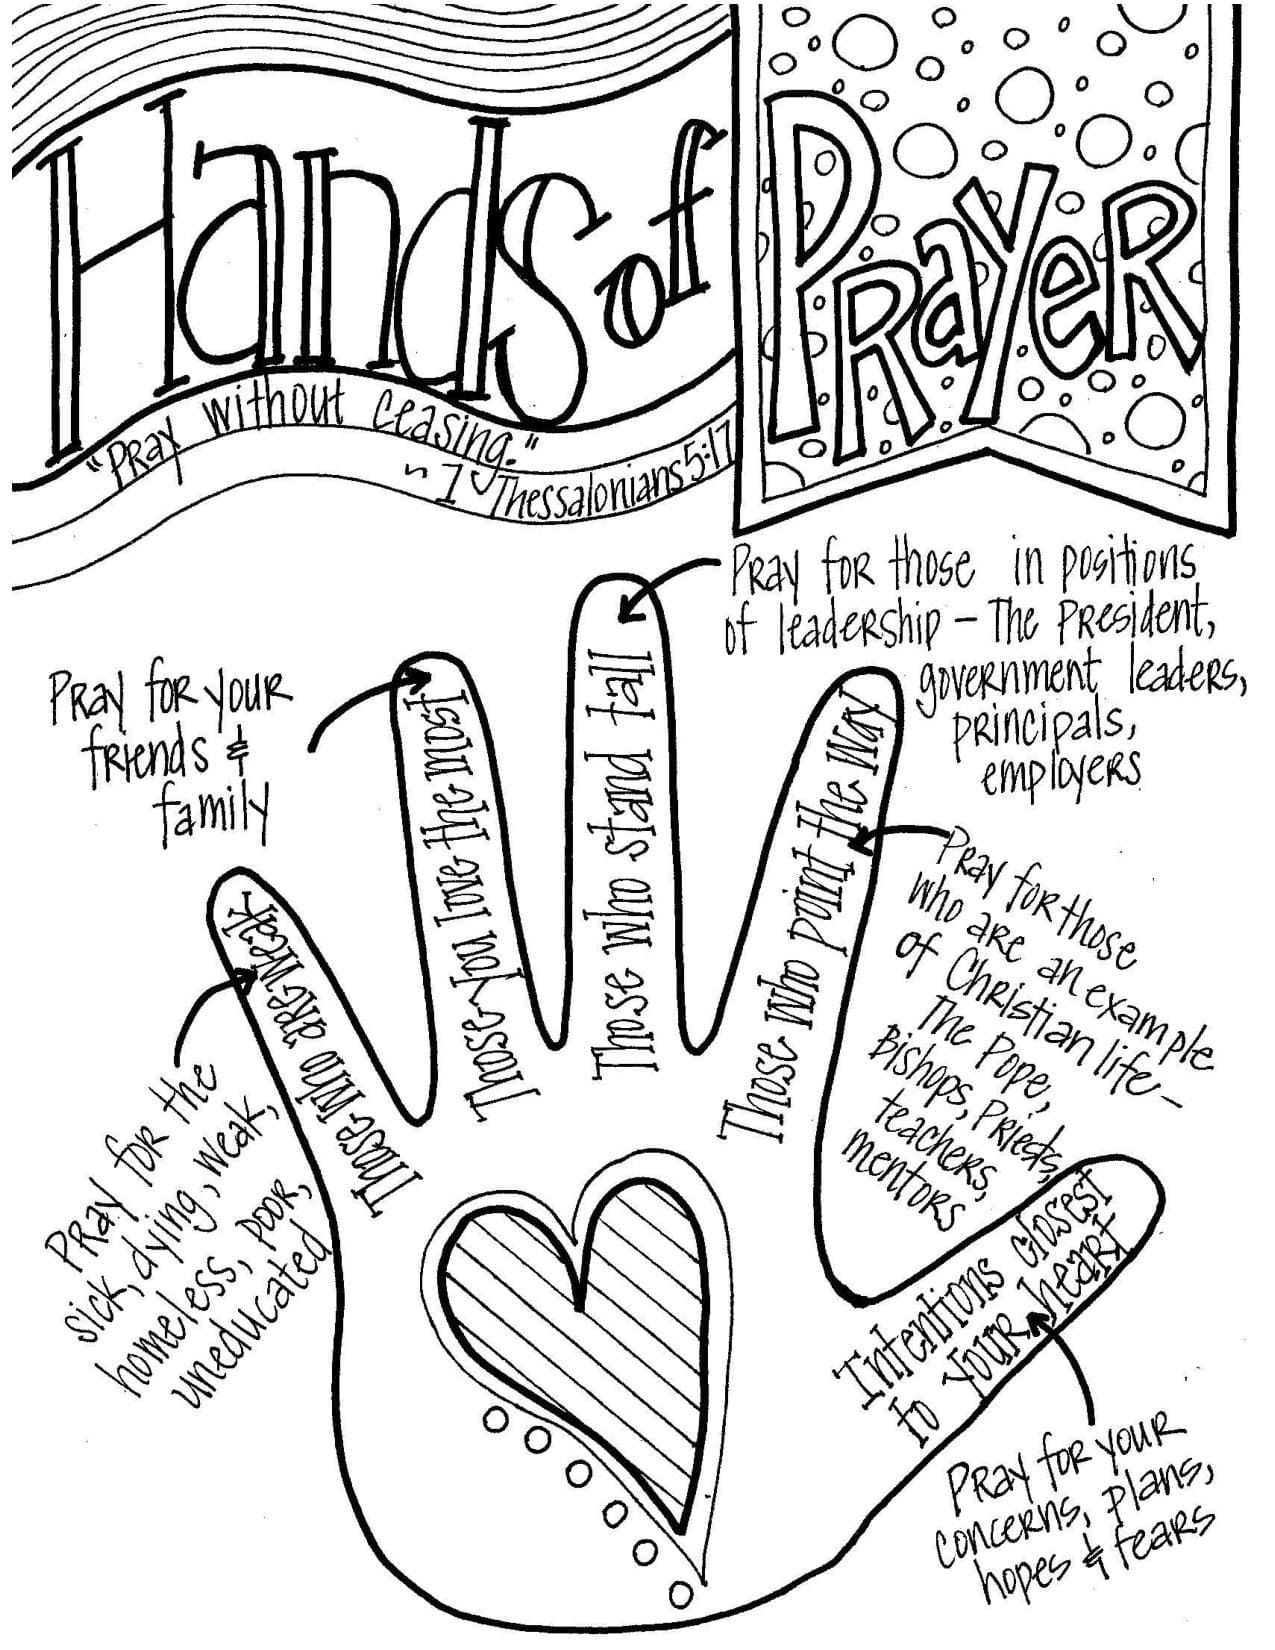 hands-of-prayer-coloring-page-free-printable-coloring-pages-for-kids